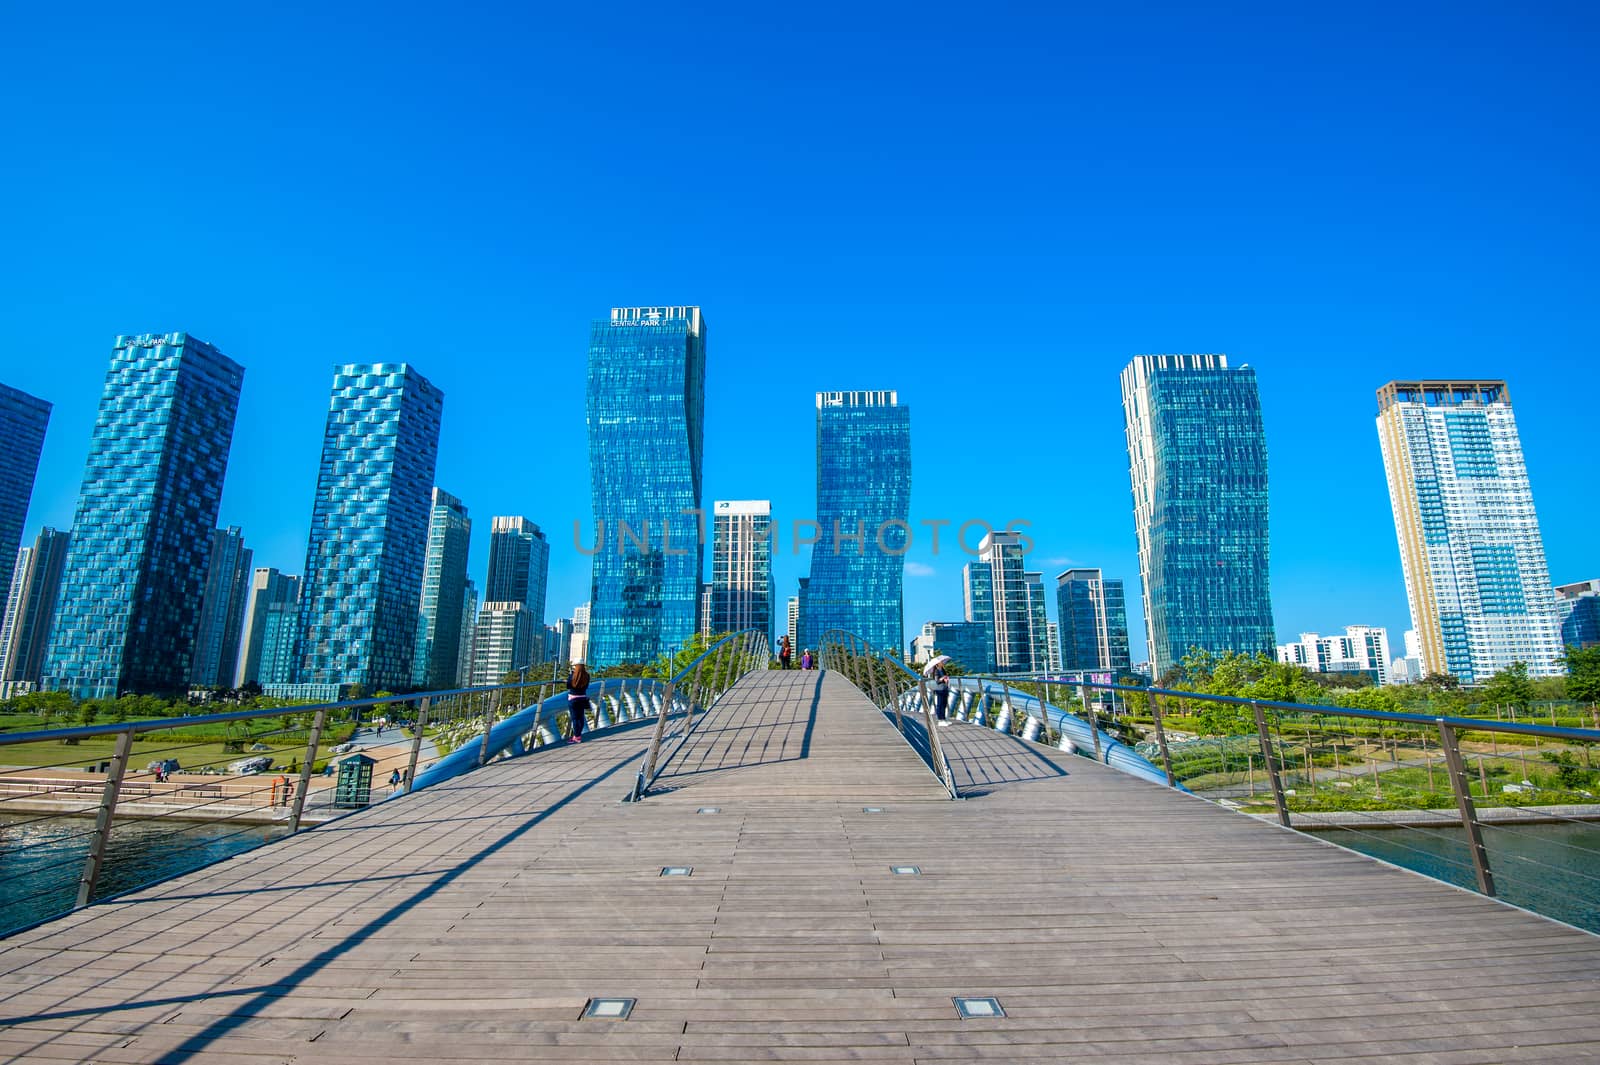 Songdo Central Park is the green space plan,inspired by NYC. by gutarphotoghaphy